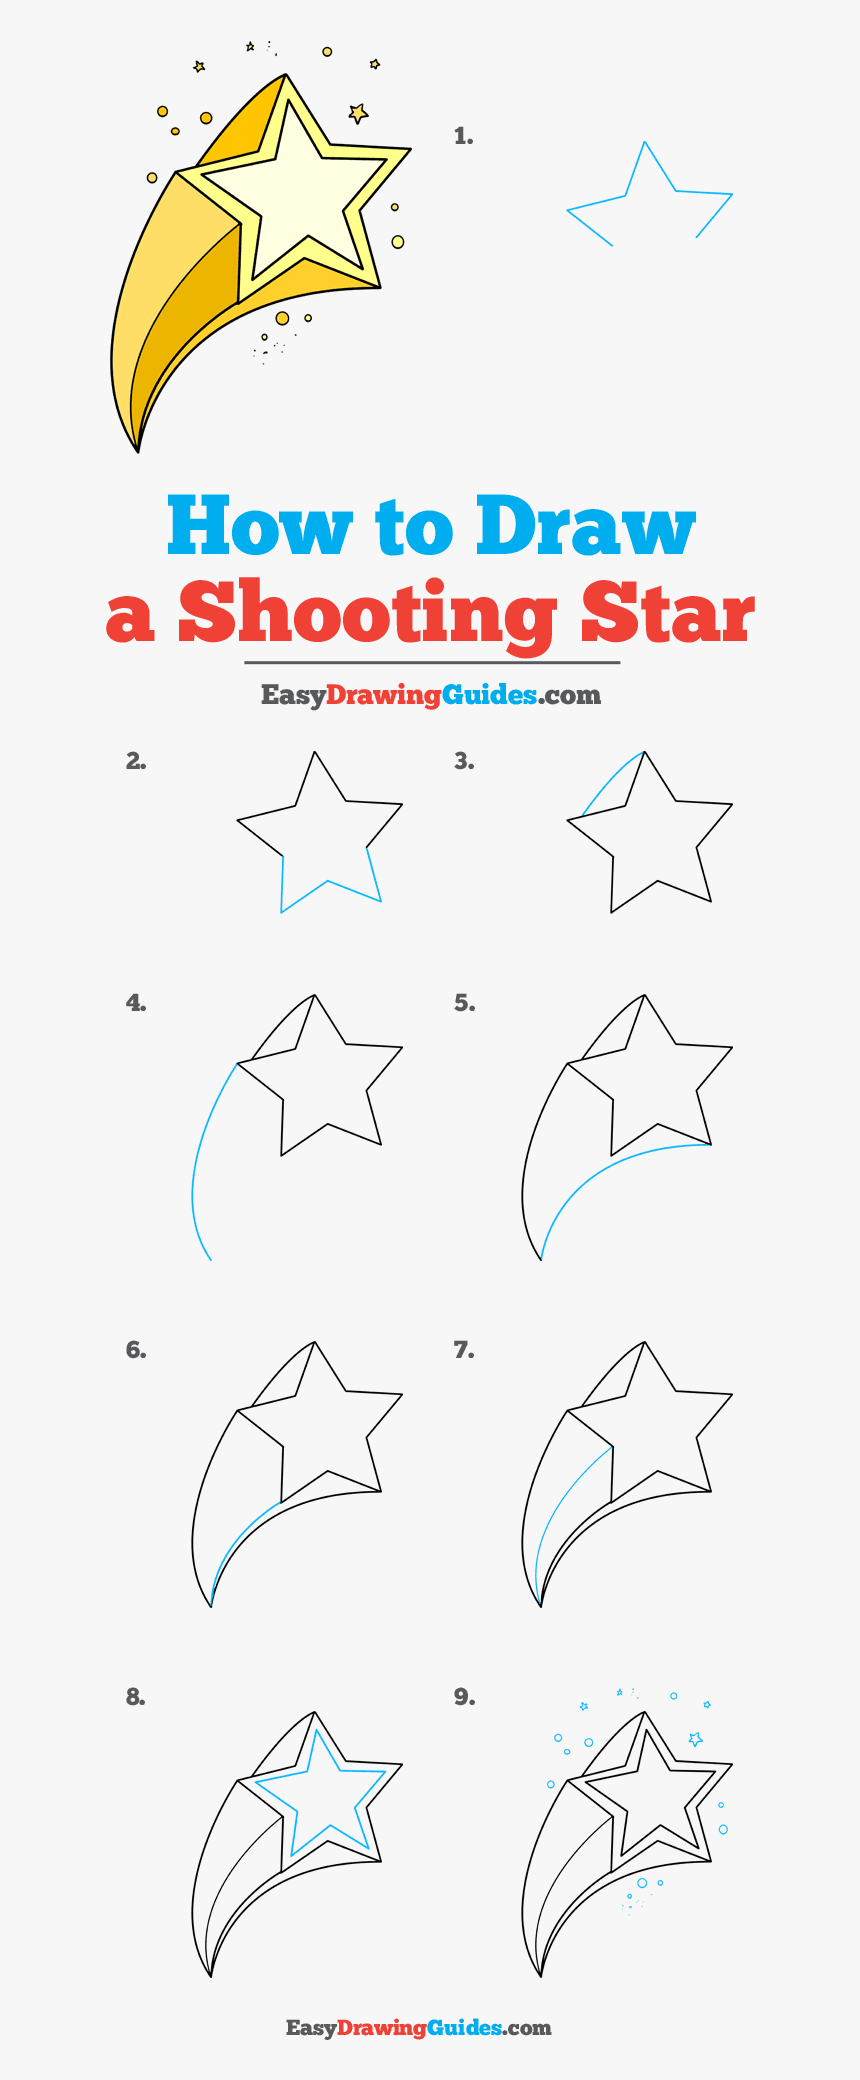 How To Draw Shooting Star - Shoo